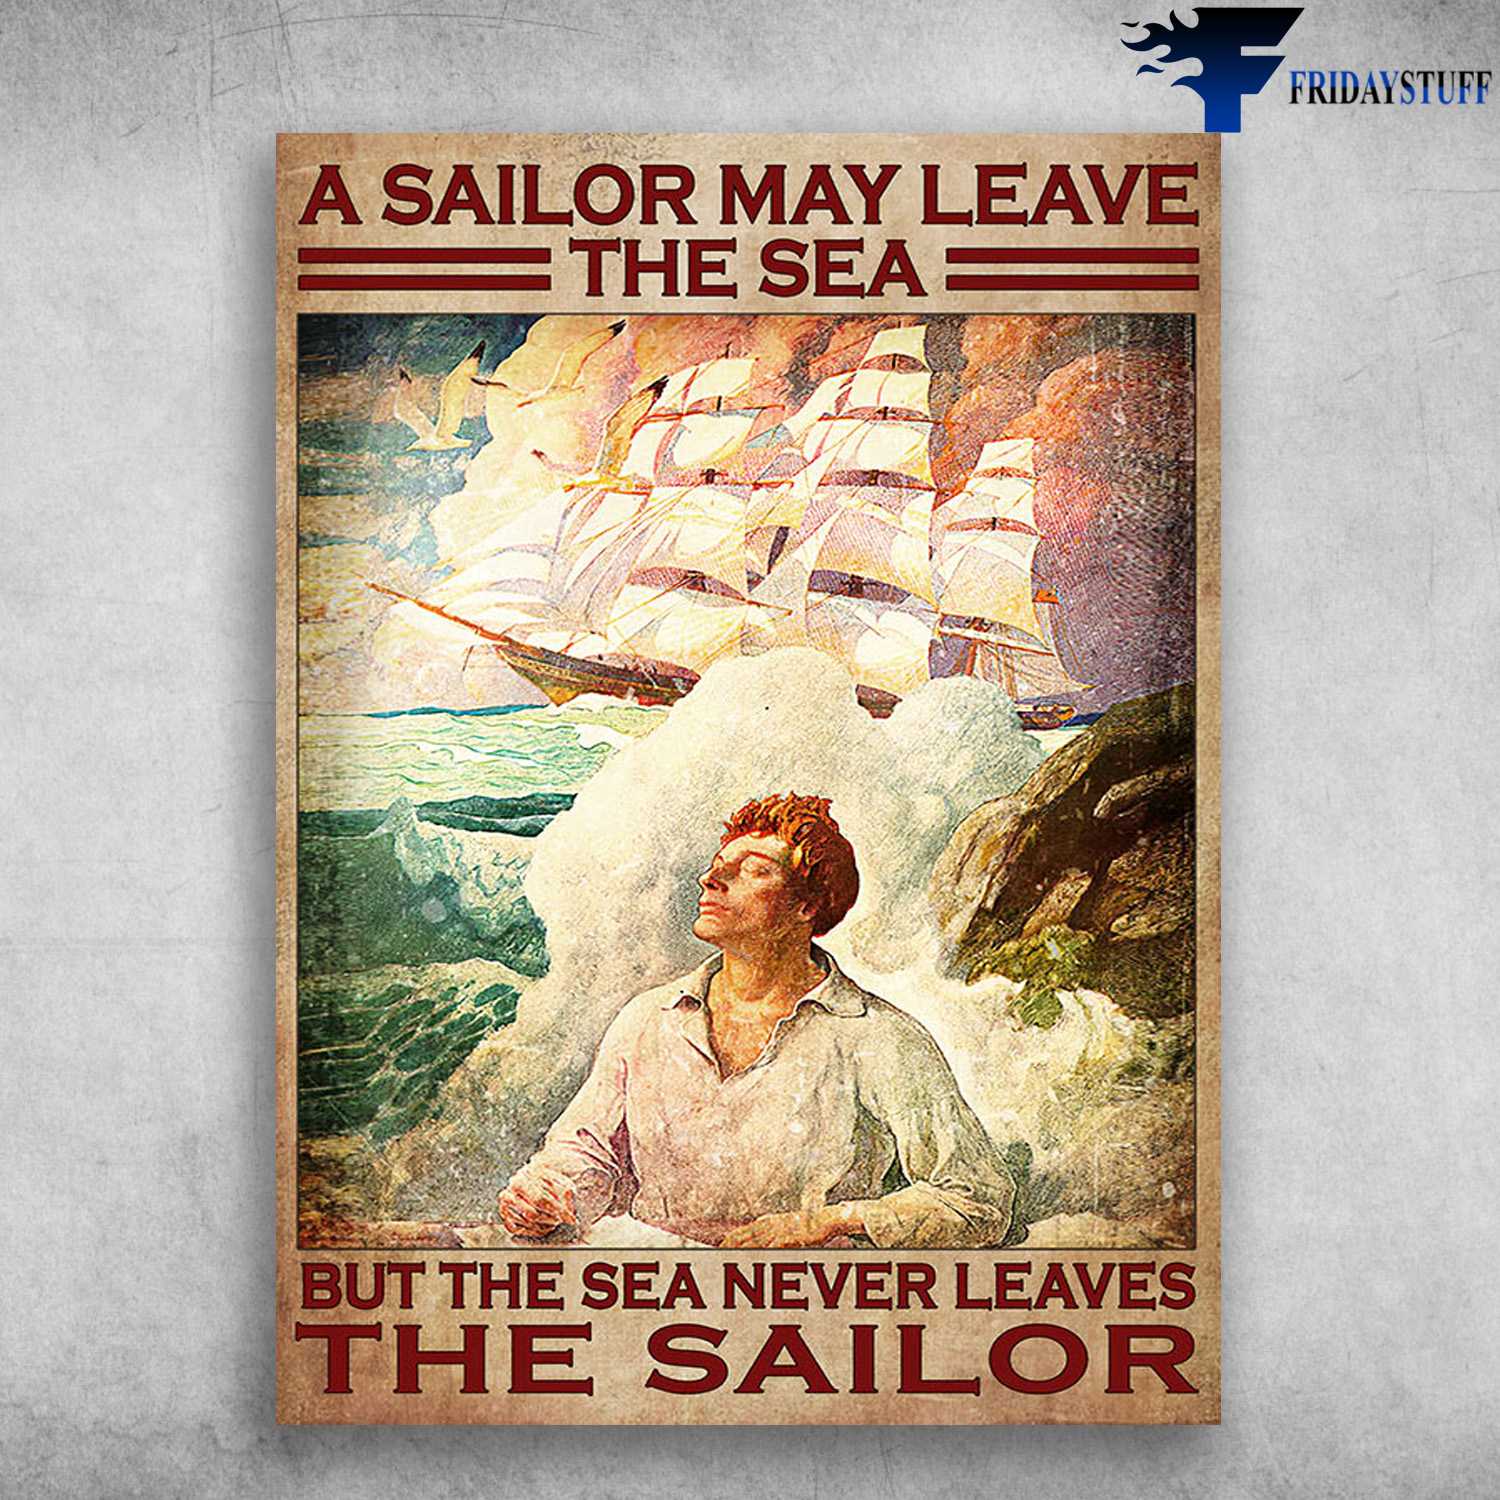 Sailor Poster - Sailor May Leave The Sea, But The Sea Never Leaves The Sailor, Sailboat In The Sea